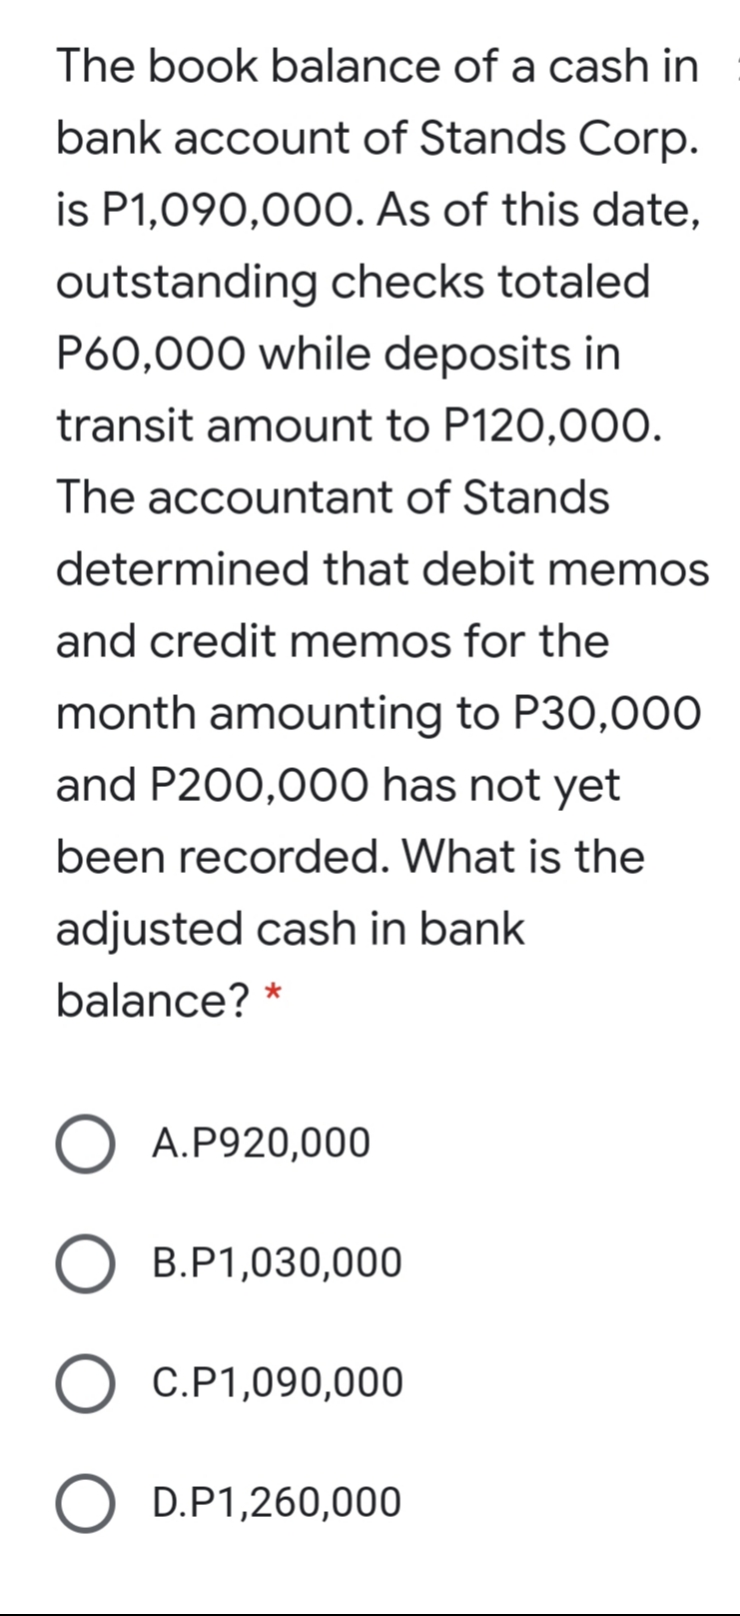 The book balance of a cash in
bank account of Stands Corp.
is P1,090,00O. As of this date,
outstanding checks totaled
P60,000 while deposits in
transit amount to P120,00O.
The accountant of Stands
determined that debit memos
and credit memos for the
month amounting to P30,000
and P200,000 has not yet
been recorded. What is the
adjusted cash in bank
balance? *
A.P920,000
B.P1,030,000
O C.P1,090,000
O D.P1,260,000
